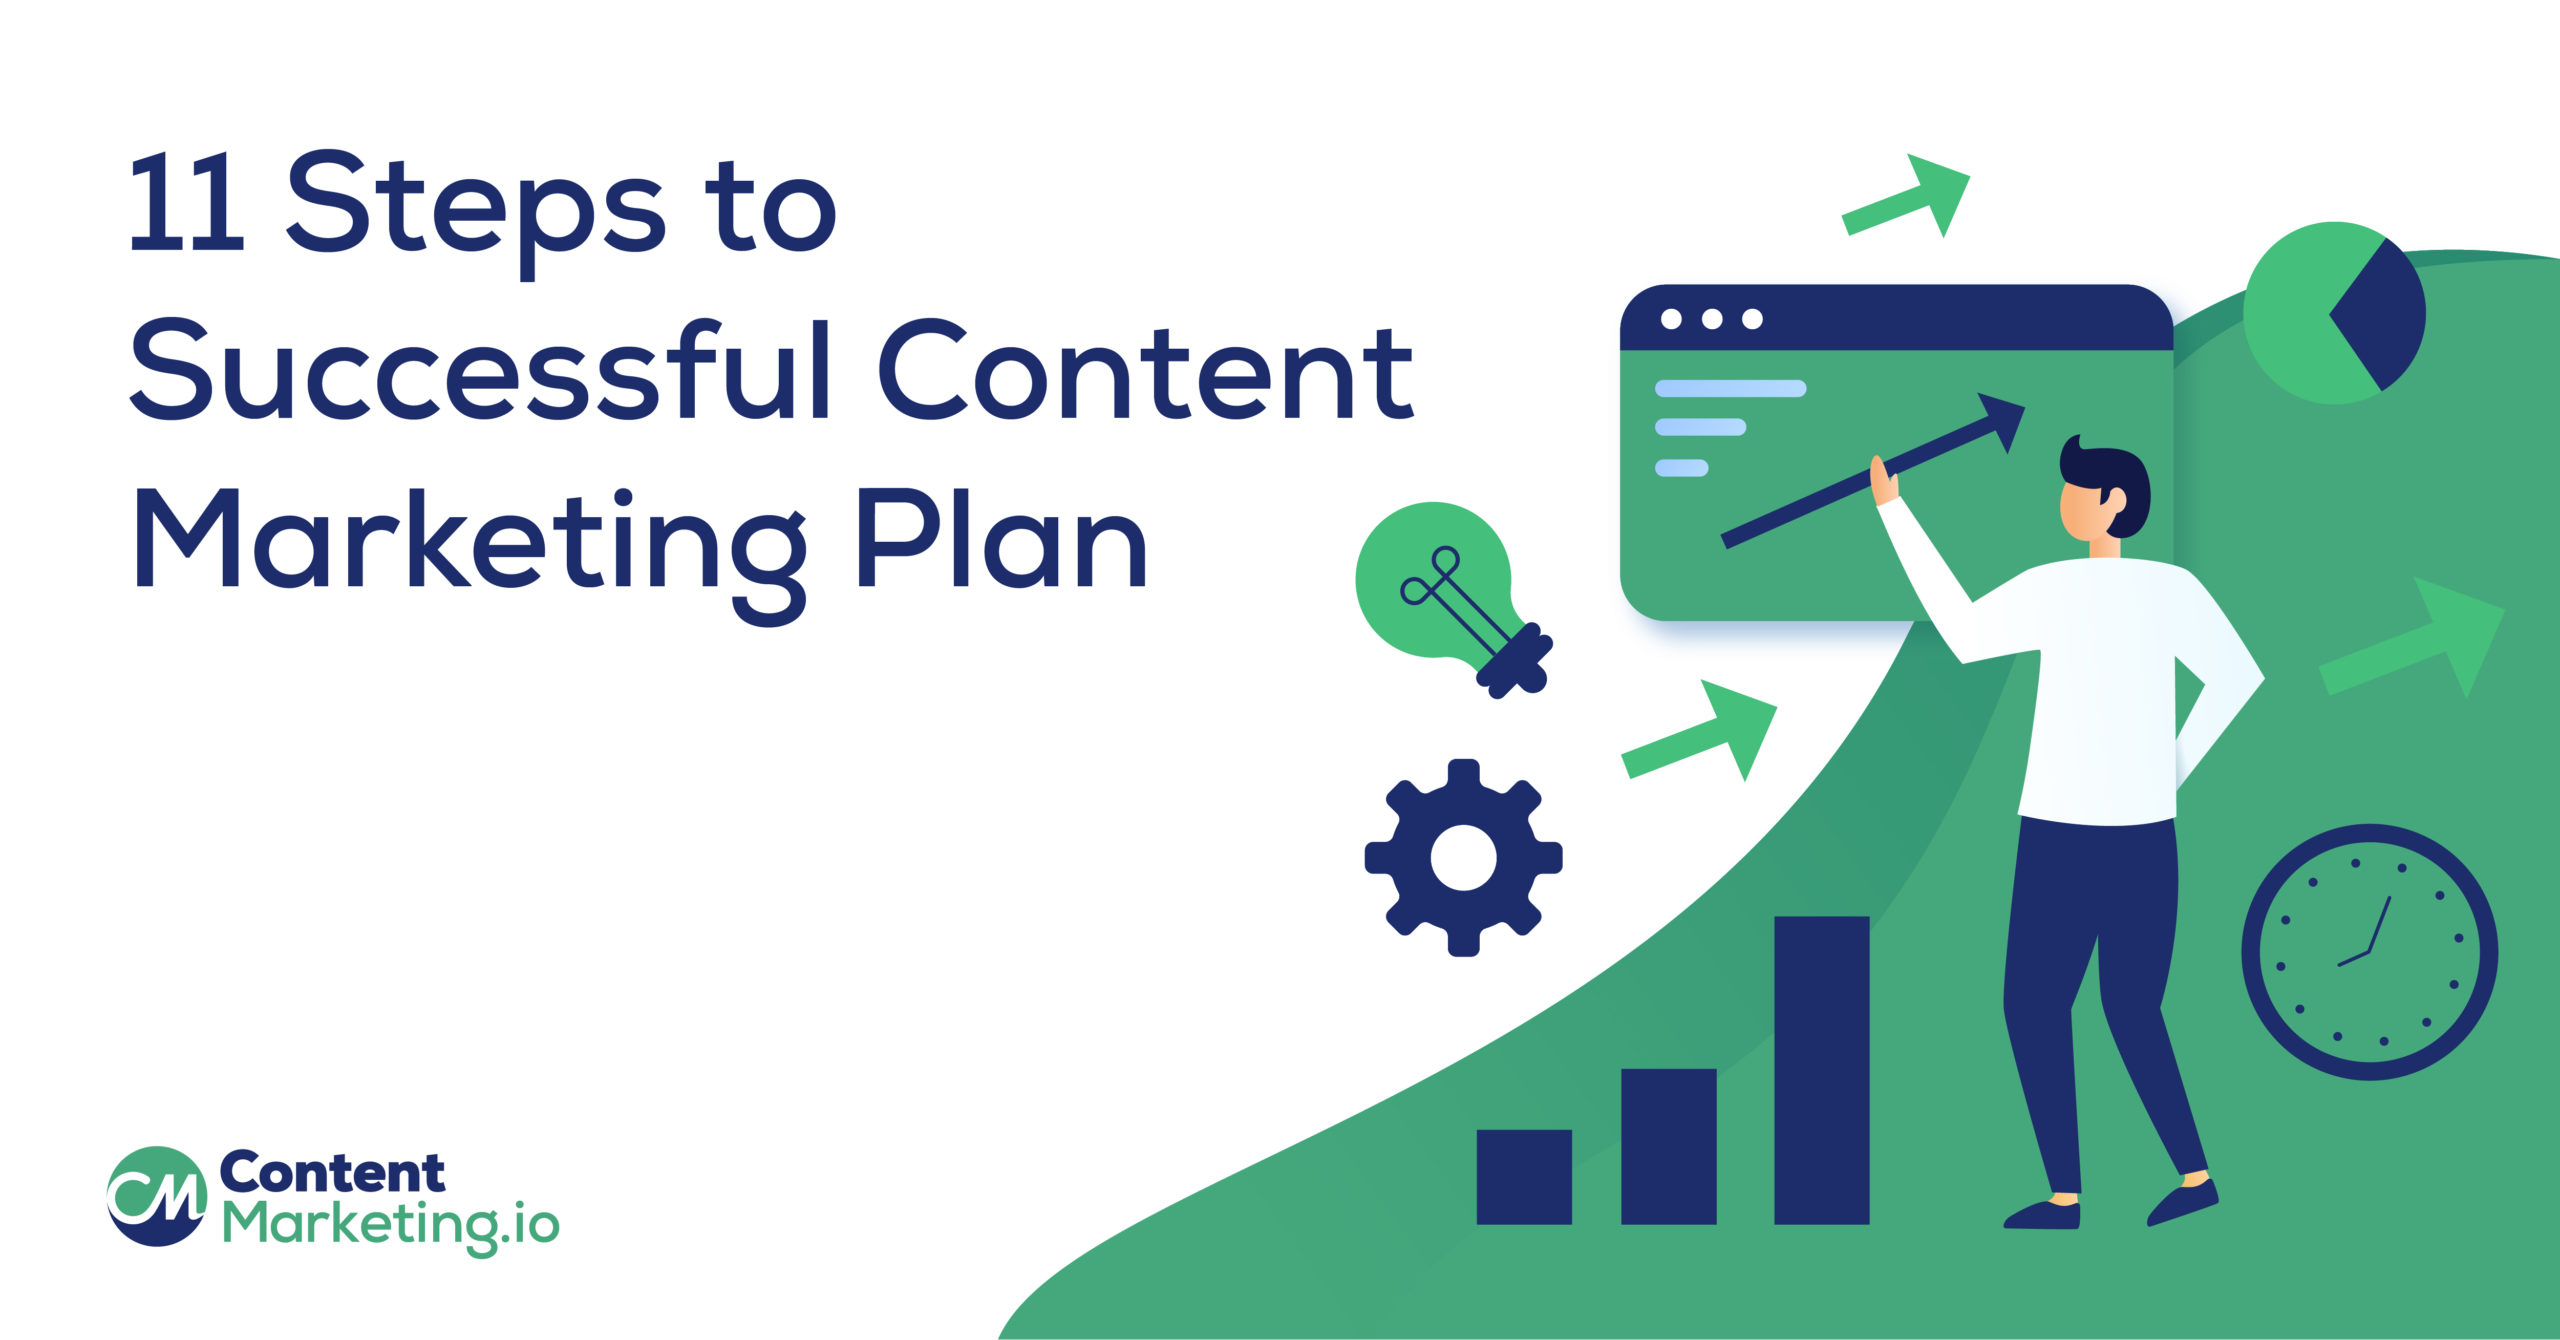 11 Steps to a Successful Content Marketing Plan